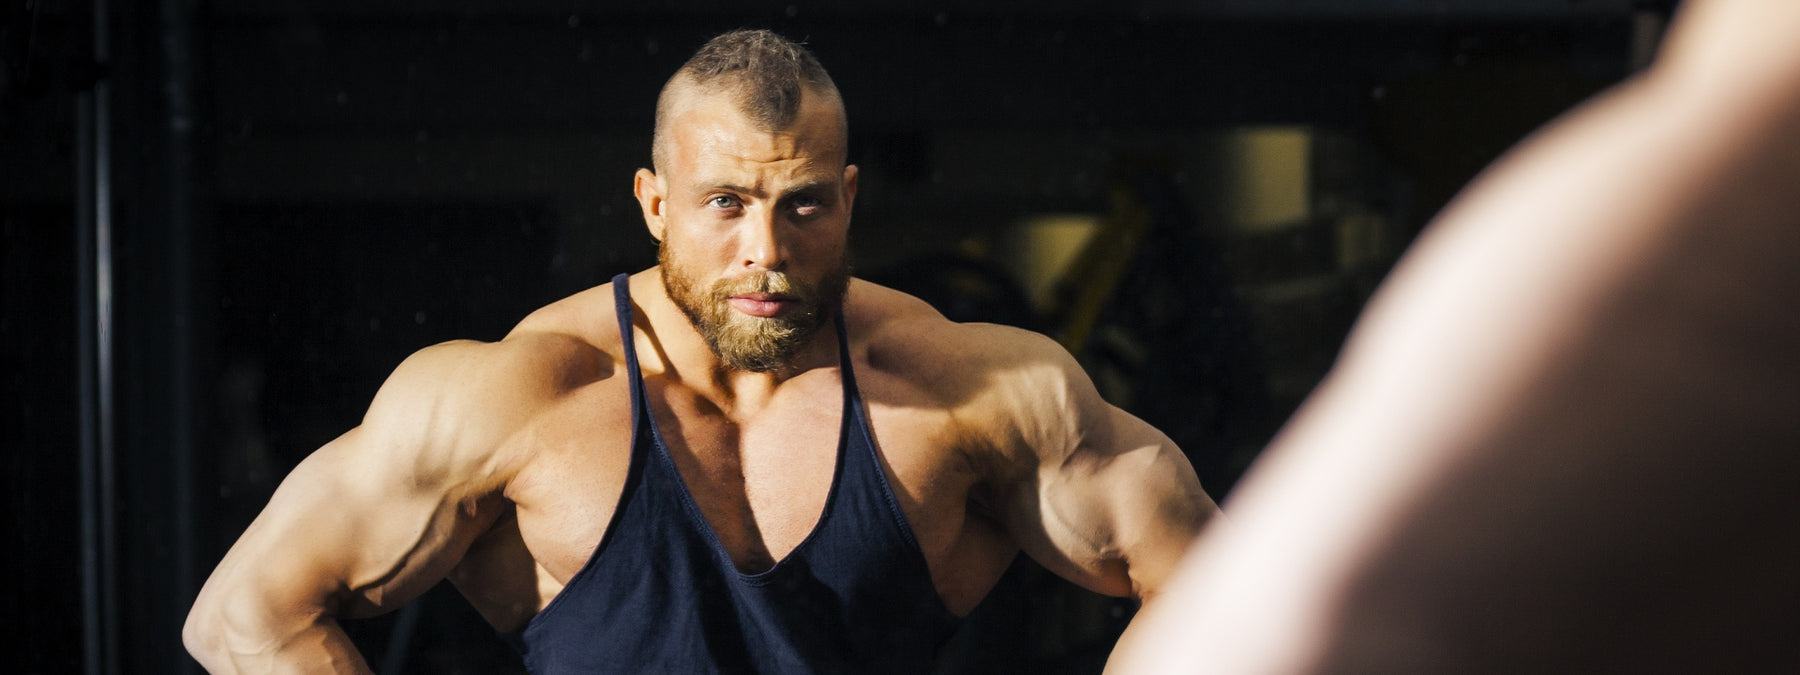 The Great Muscle Building Quiz of Gains! Can You Pass?